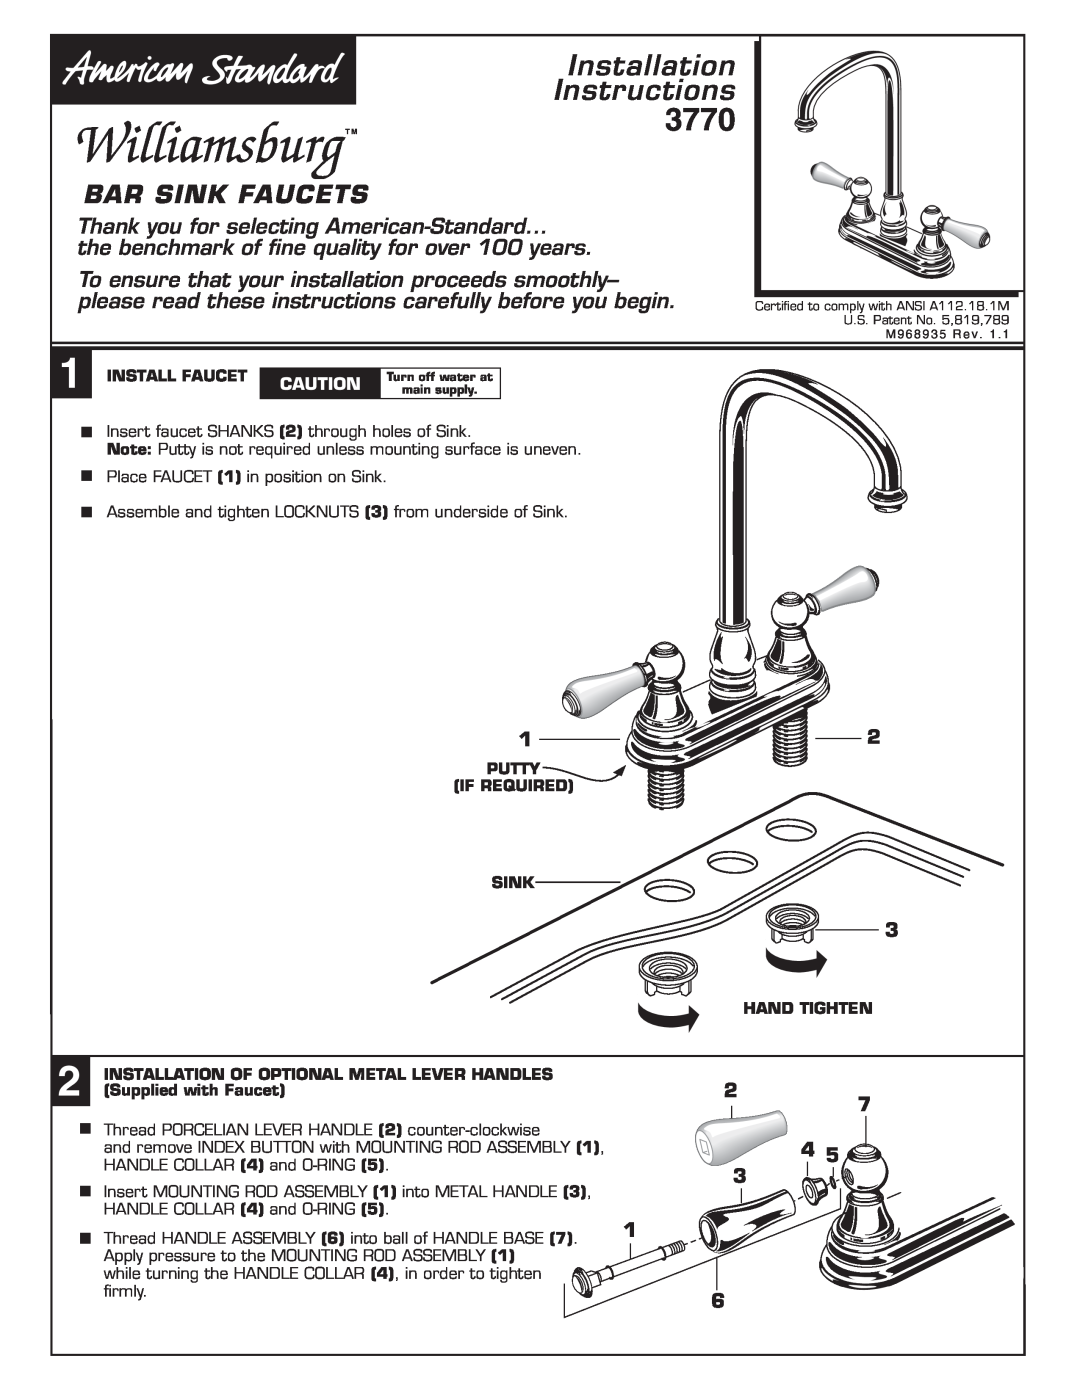 American Standard 3770 installation instructions 2 7 4 3, Install Faucet, Putty If Required Sink, Hand Tighten 